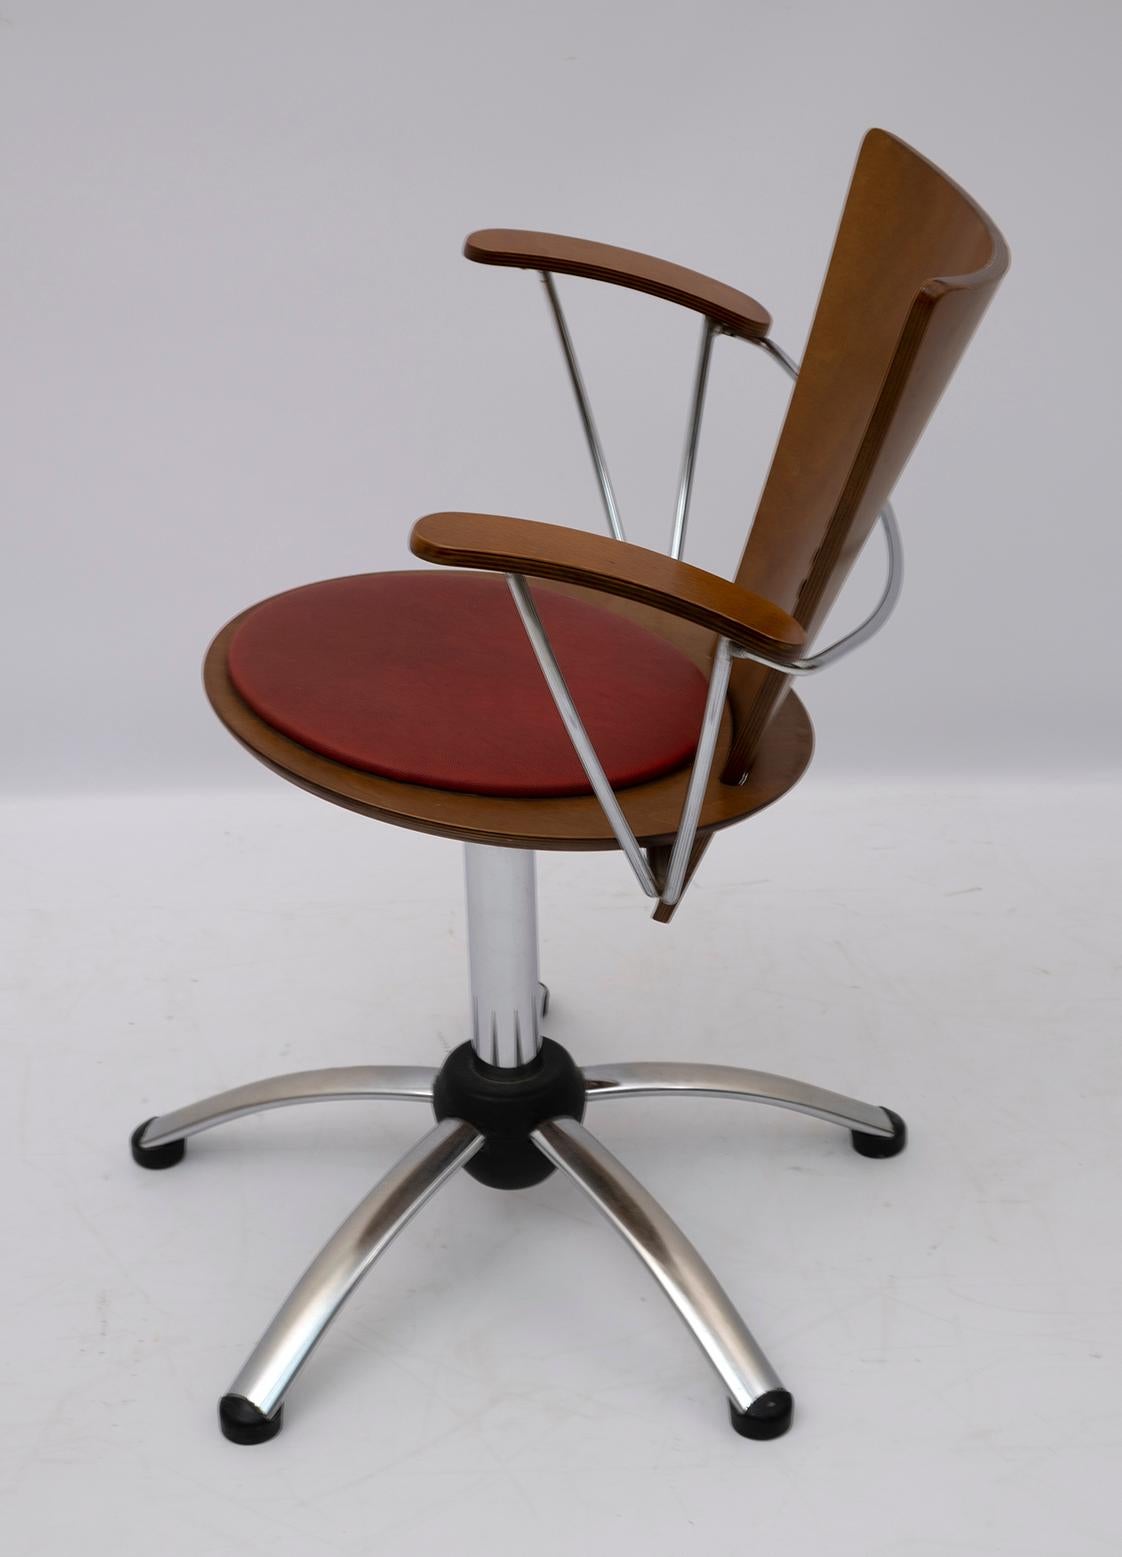 Four Postmodern Italian Swivel Chairs Curved Wood and Chromed Metal, 1980s For Sale 1